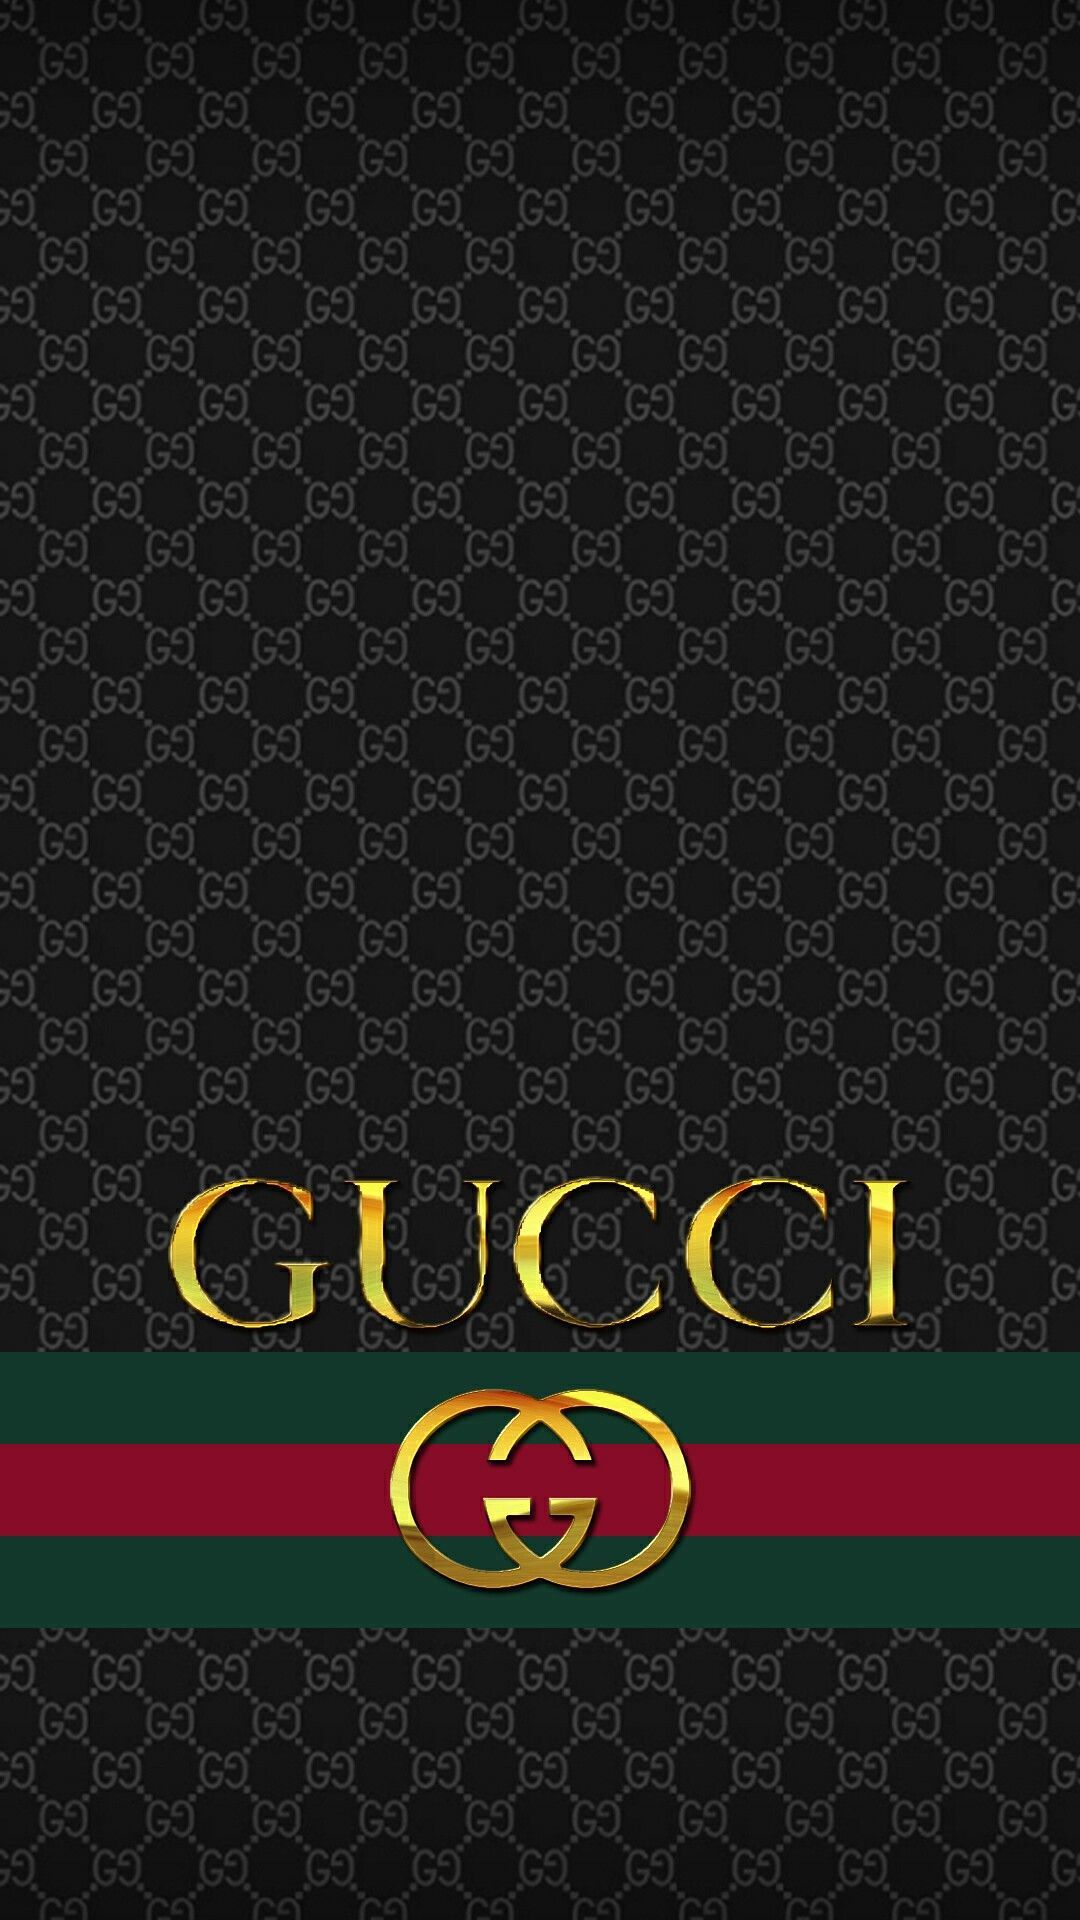 Gucci iPhone Wallpapers -Top 25 Best Gucci iPhone Wallpapers - Getty  Wallpapers